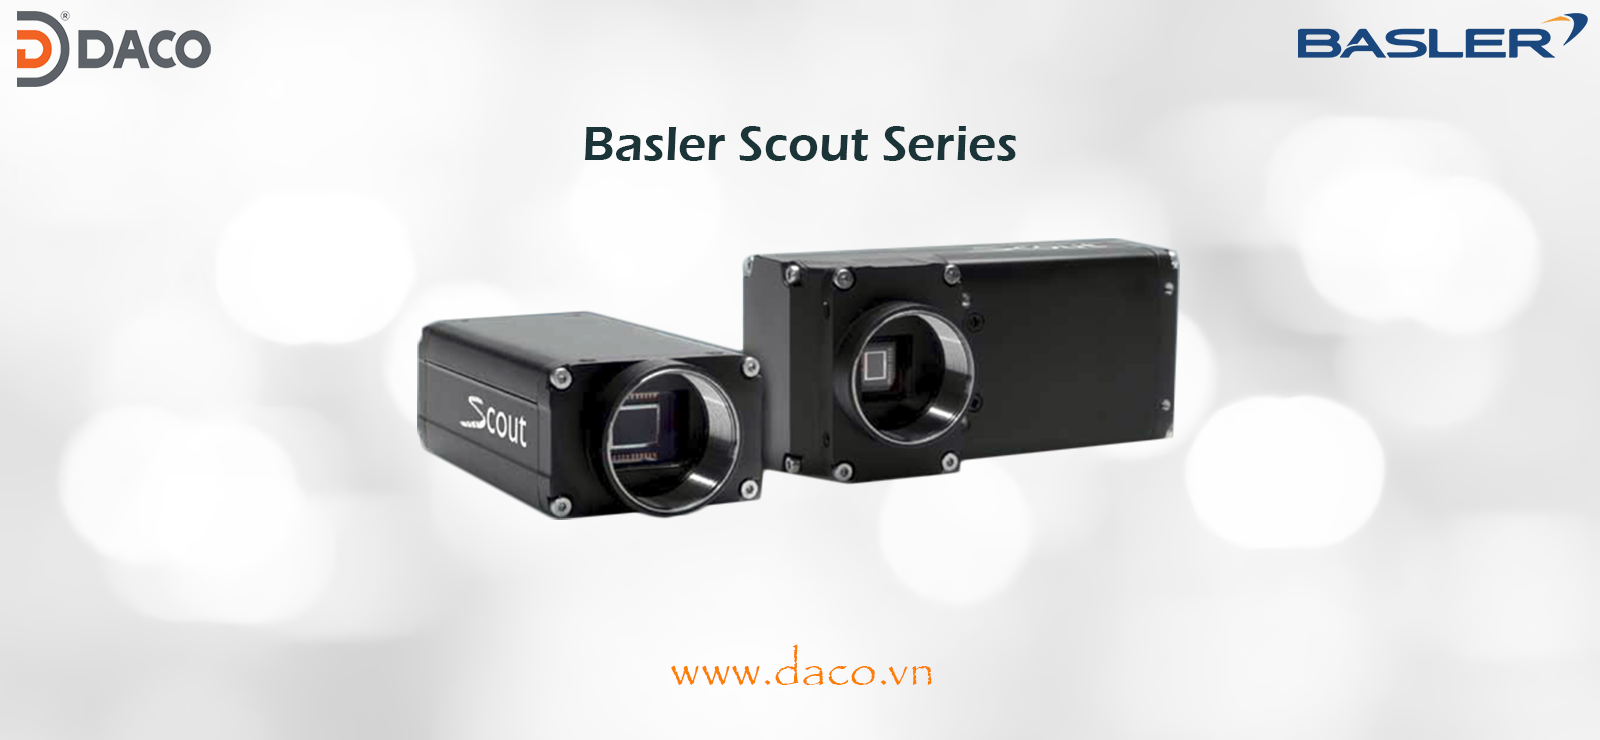 CAMERA CÔNG NGHIỆP BASLER SCOUT SERIES